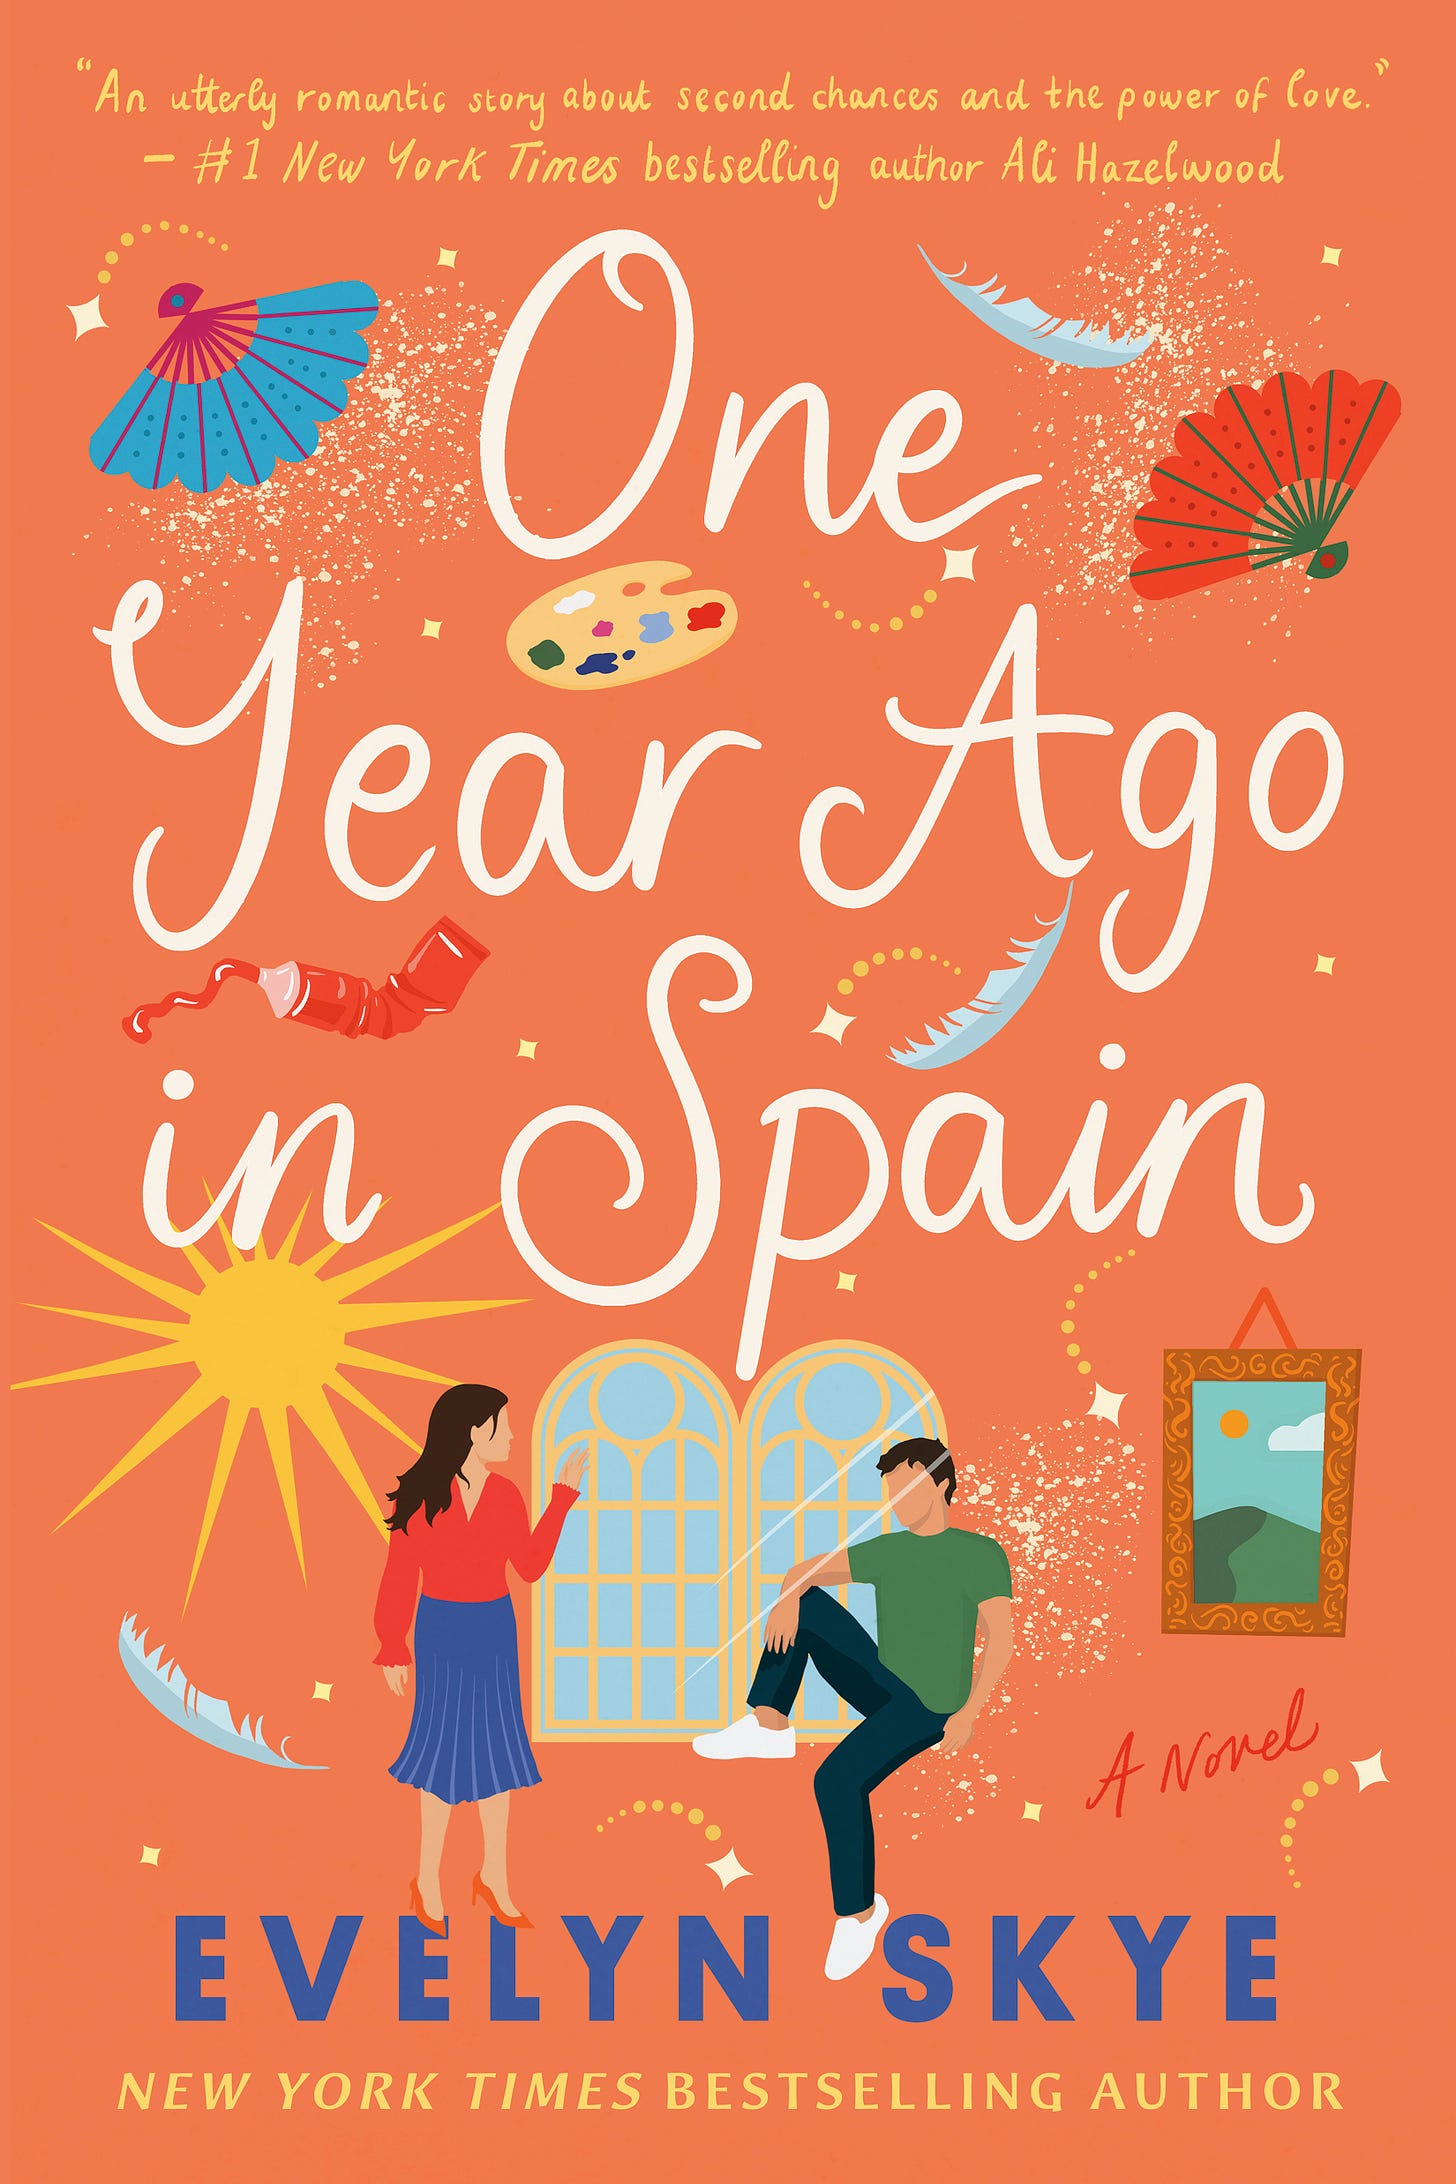 Book cover art for One Year Ago in Spain by Evelyn Skye